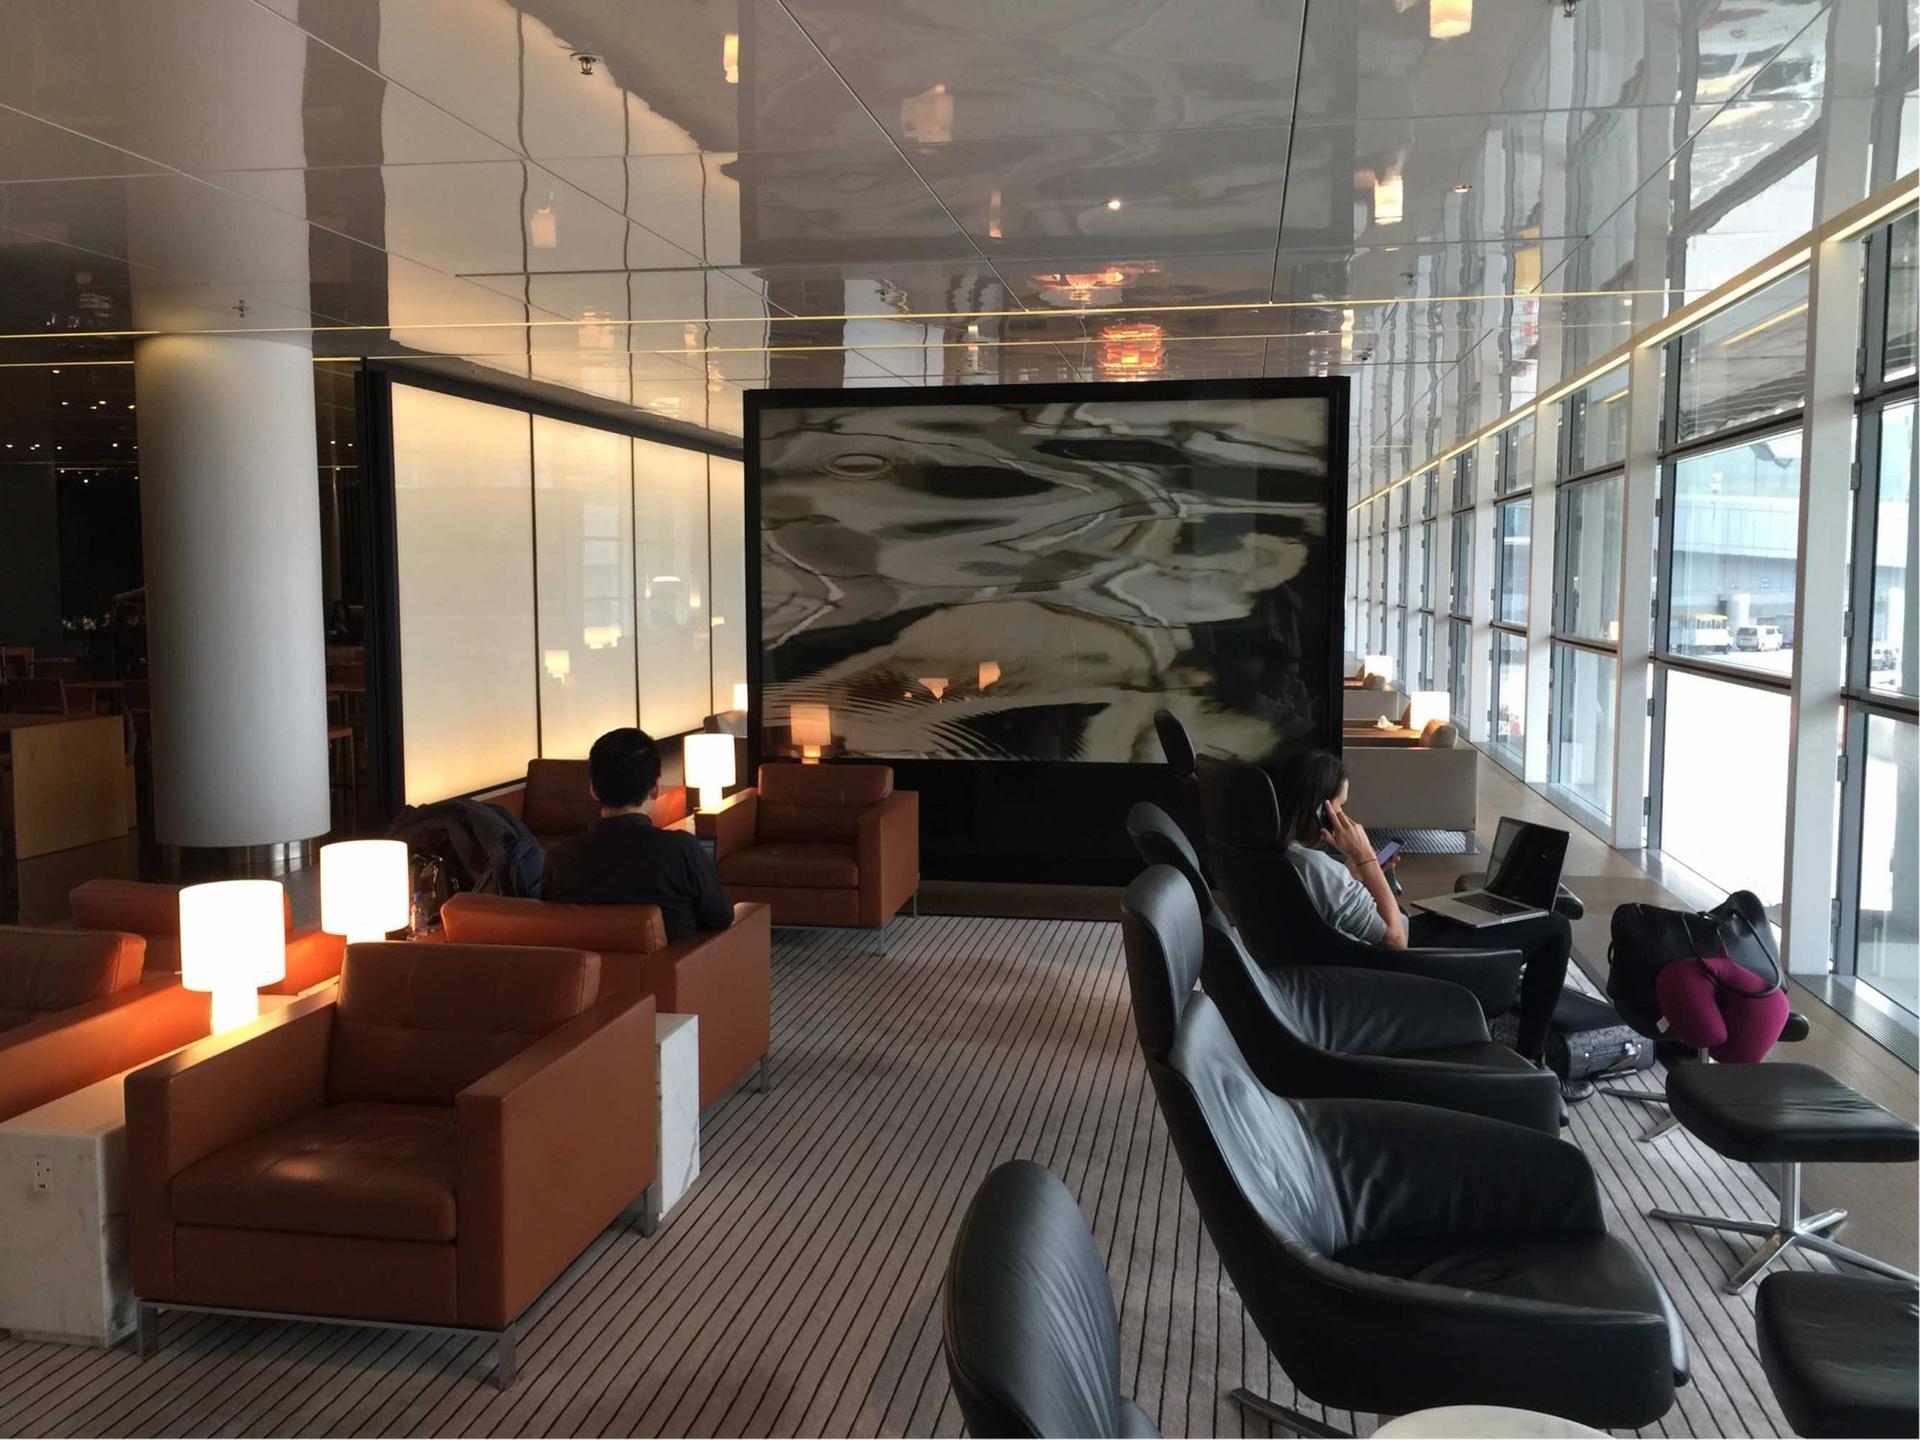 Cathay Pacific The Wing Business Class Lounge image 13 of 55